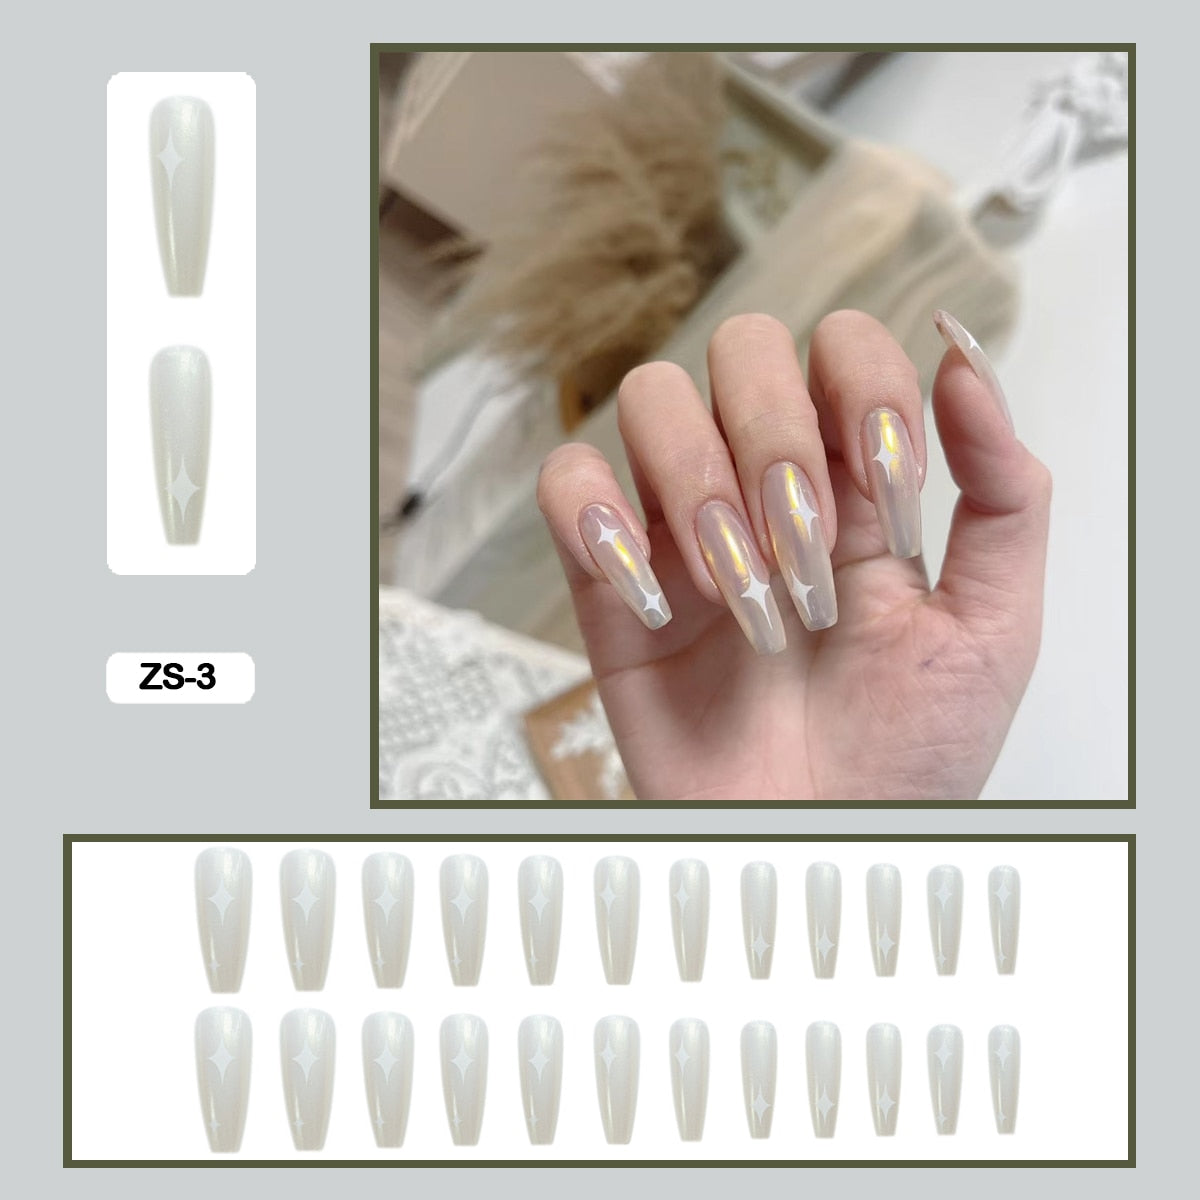 Graduation gifts 24PCS False Nails with Glue Rhinestones Long Trapezoid Detachable Pearl Stick on Nails Press on Nails Art With Wearing Tools